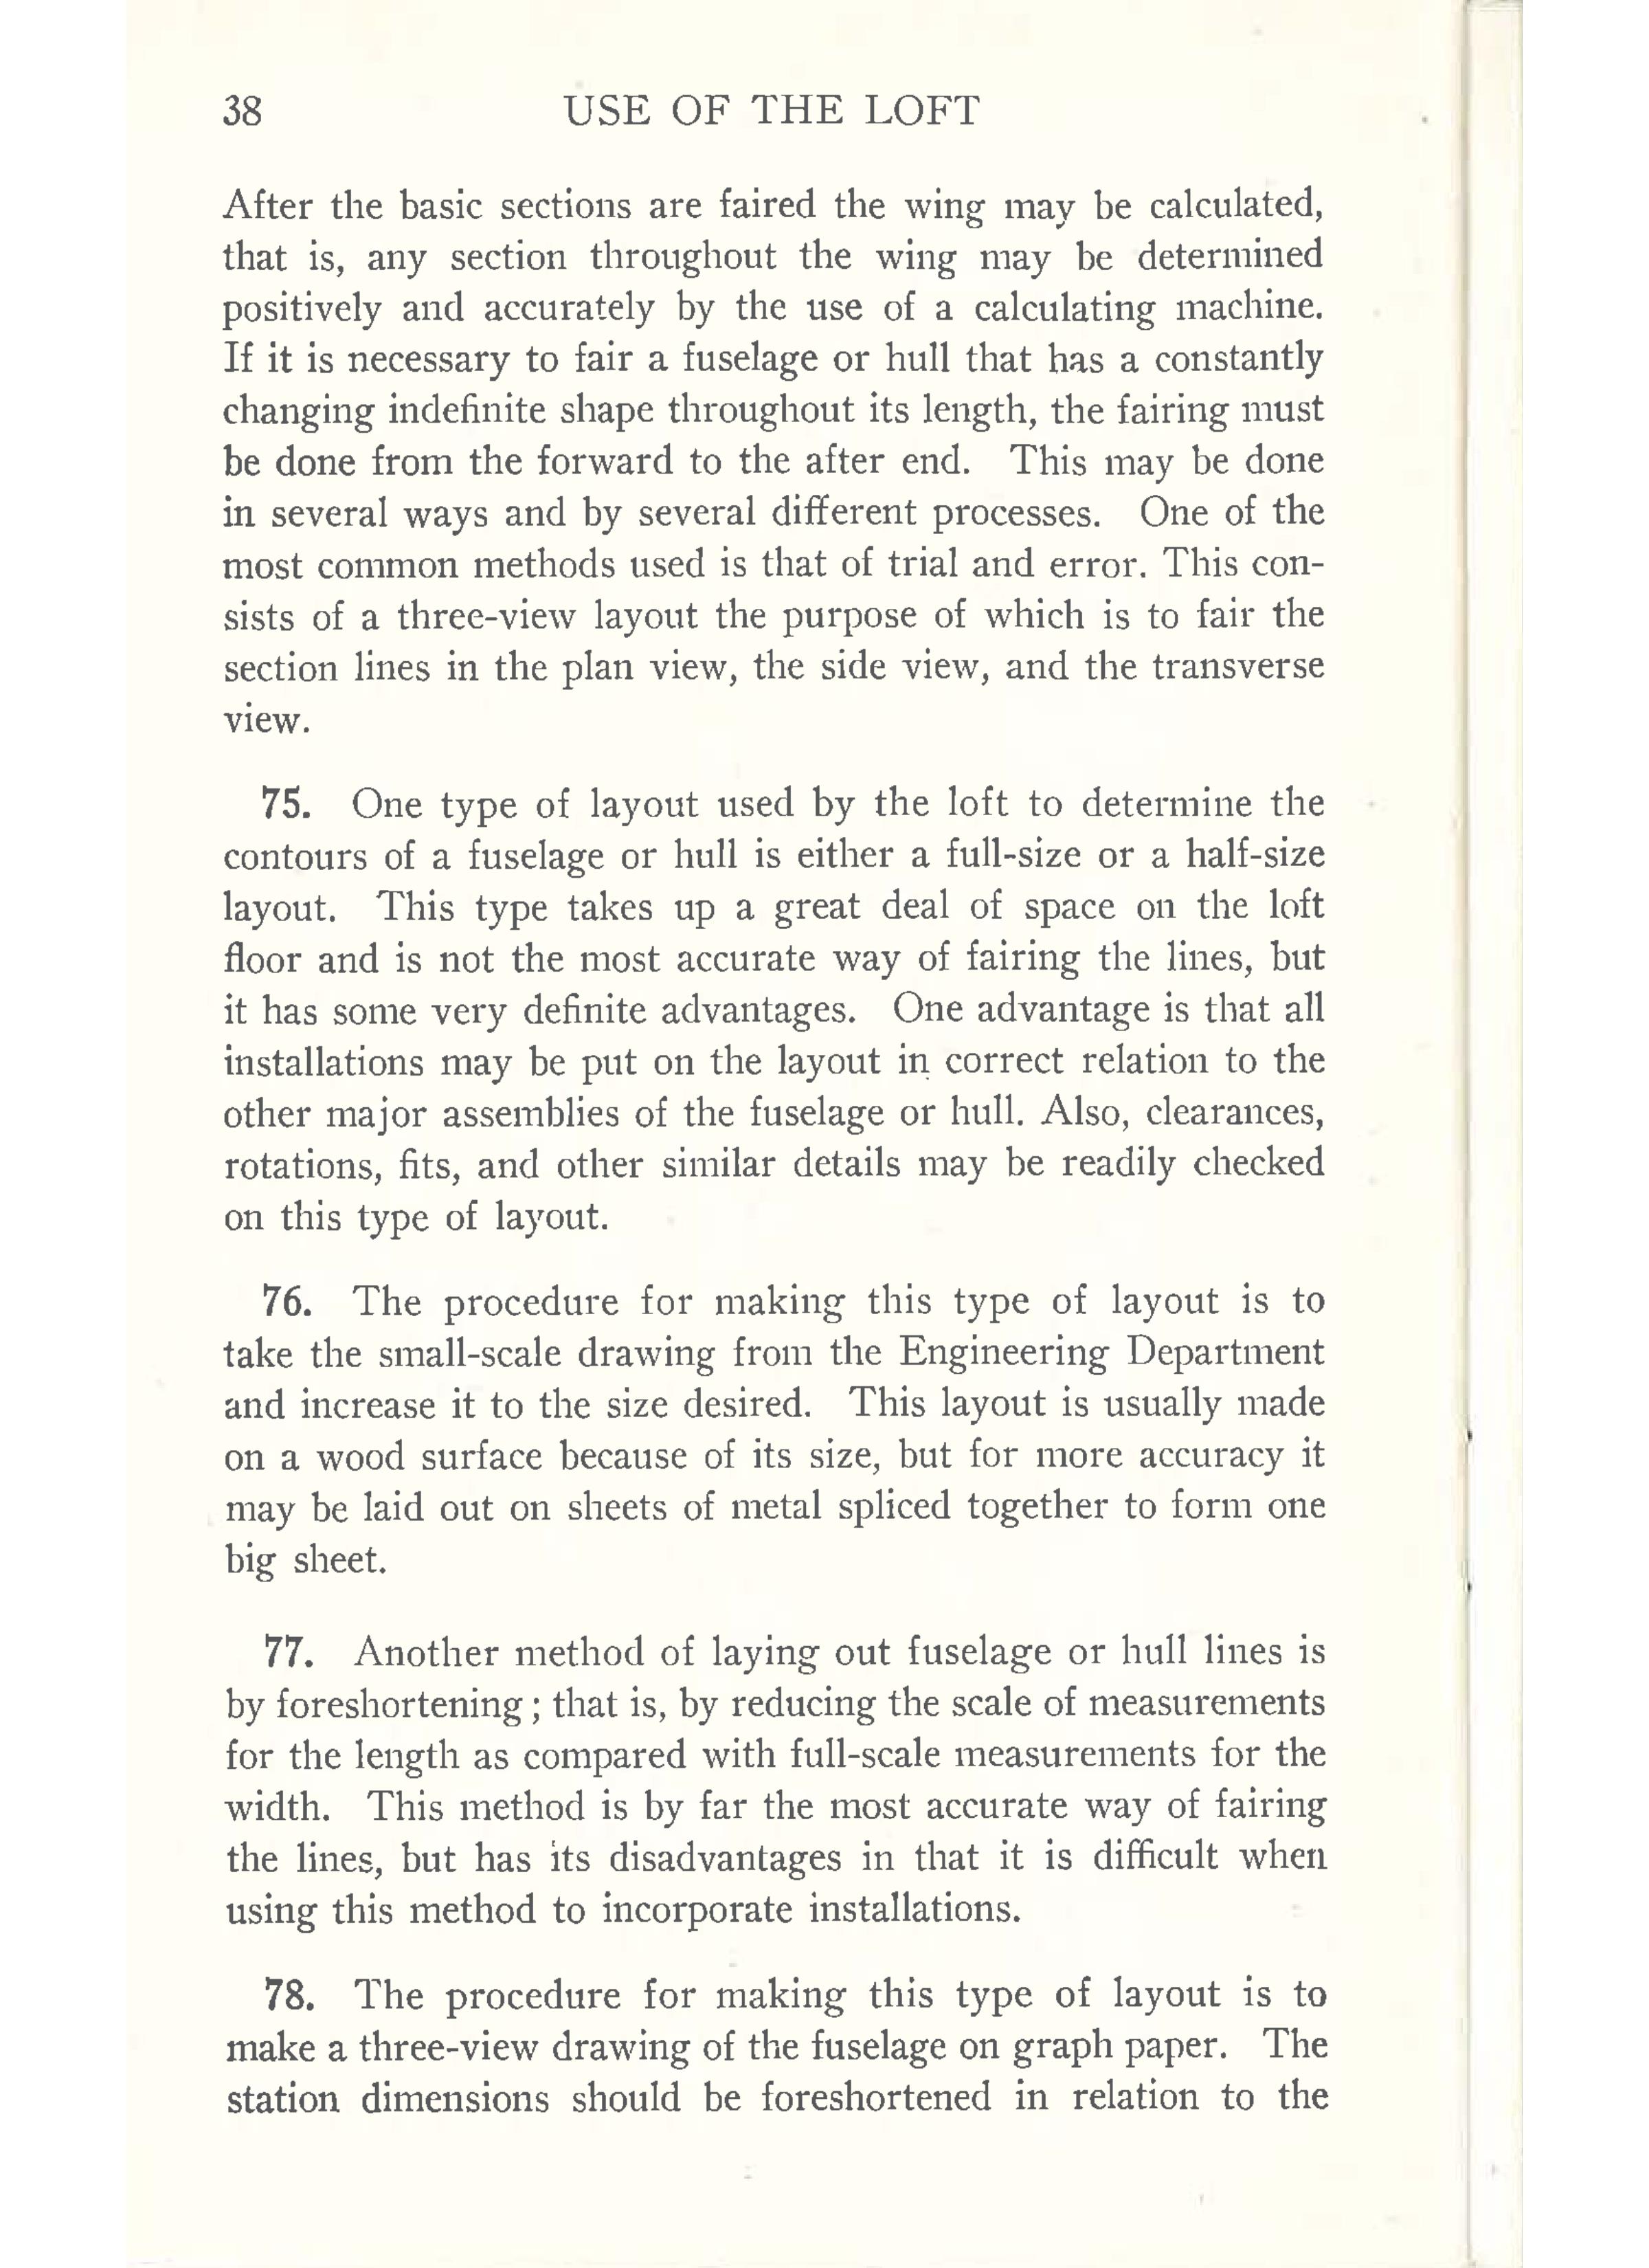 Sample page 40 from AirCorps Library document: Lofting and Layout - Use of the Loft - Bureau of Aeronautics